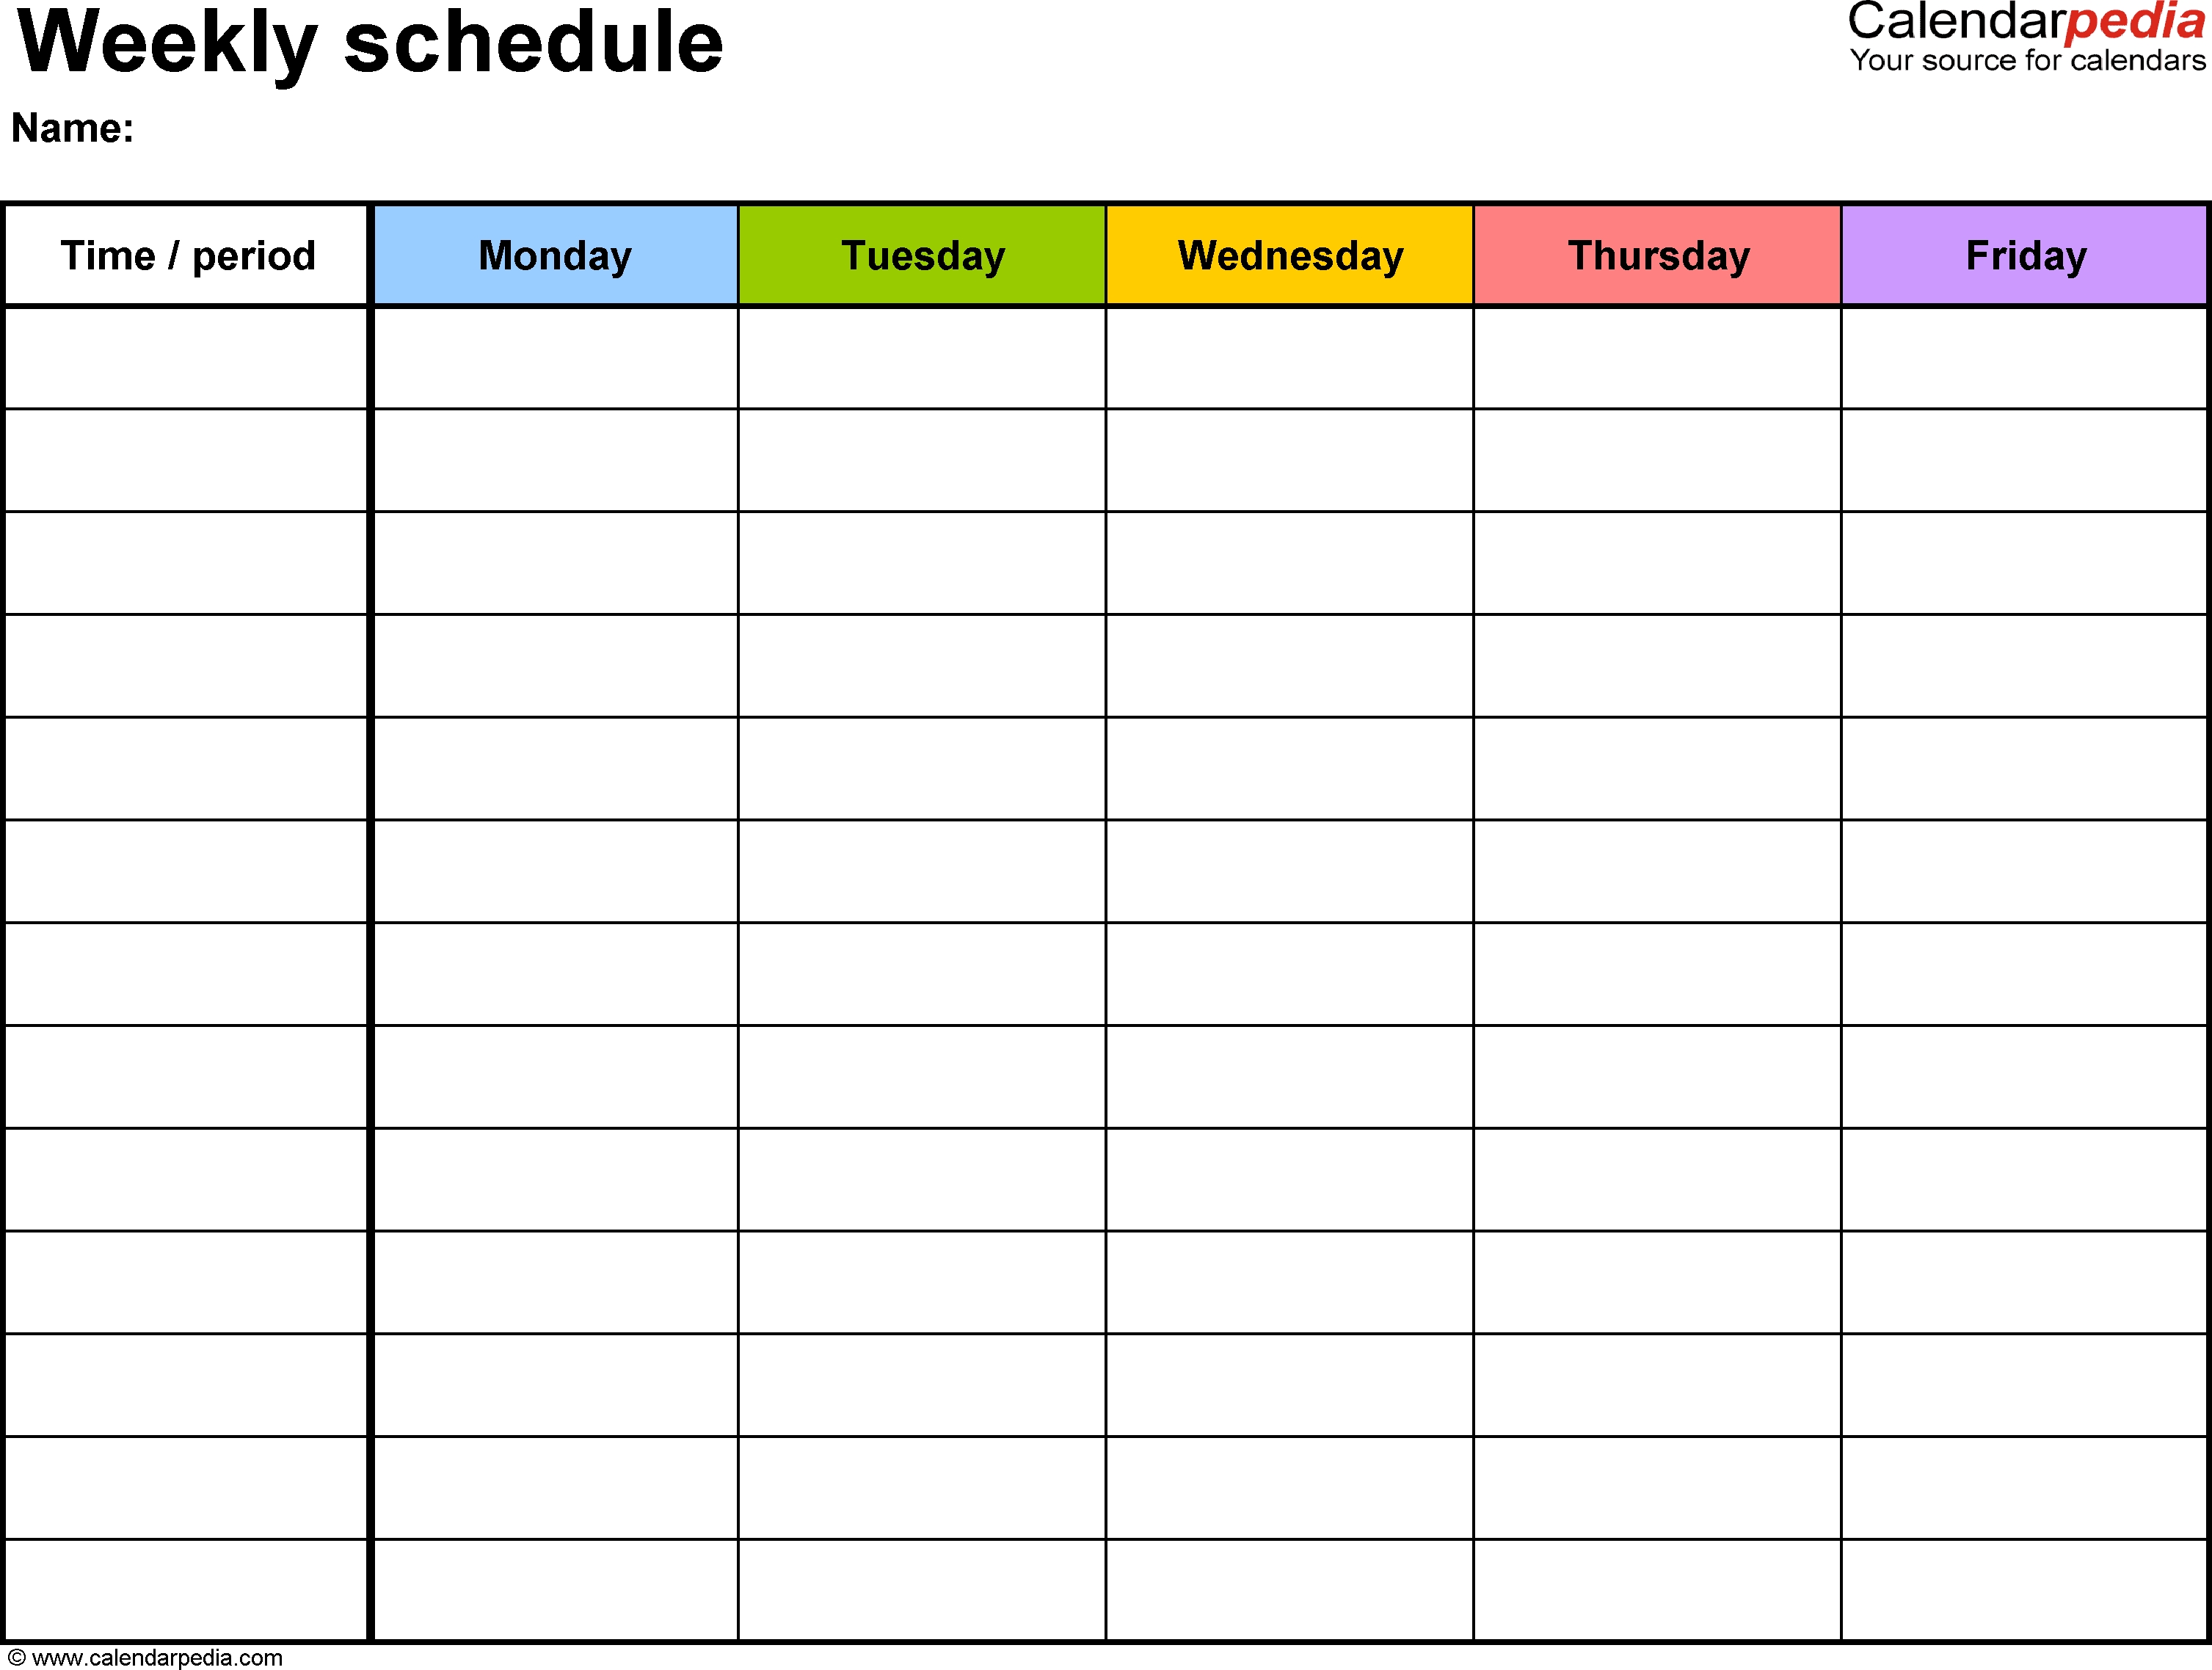 Free Weekly Schedule Templates For Word - 18 Templates regarding One Week Calendar Template With Hours